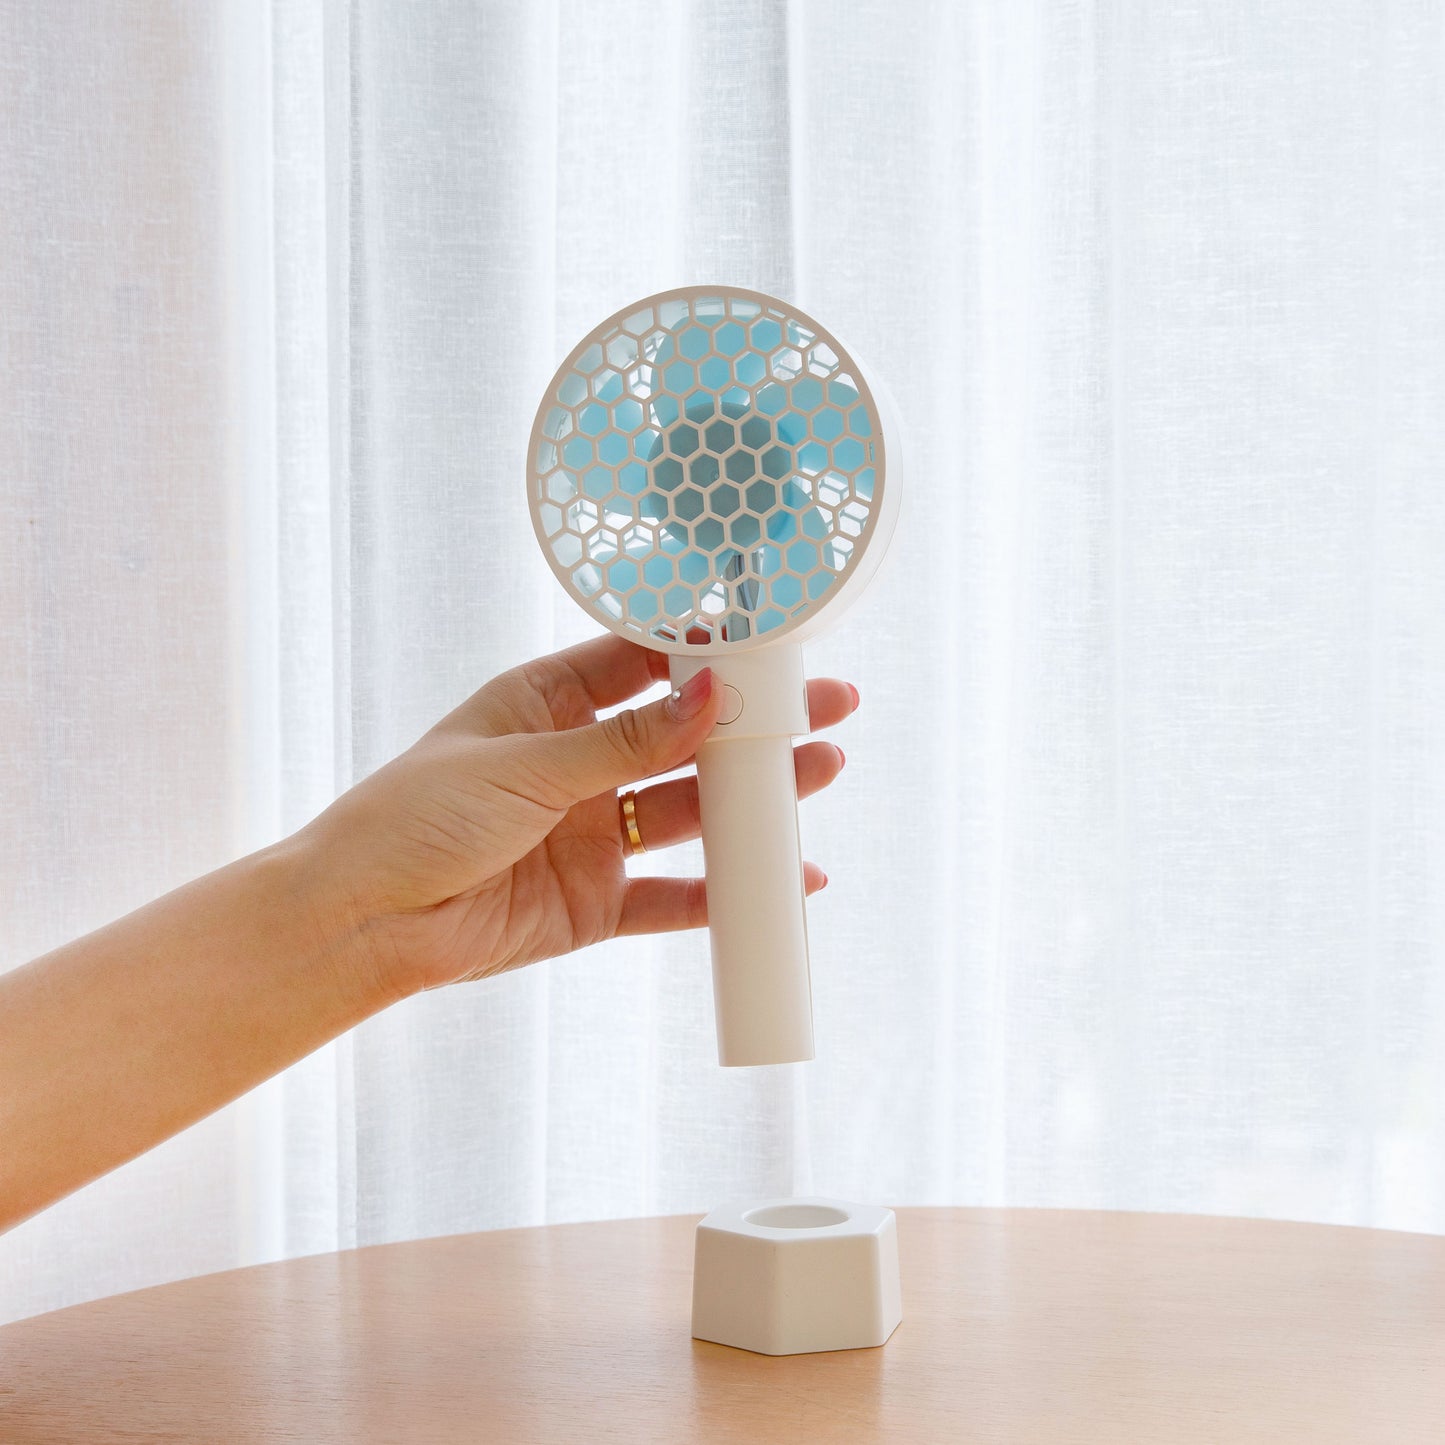 Honeycomb Faced Panel Handy Mini Fan with Cradle - Coolean